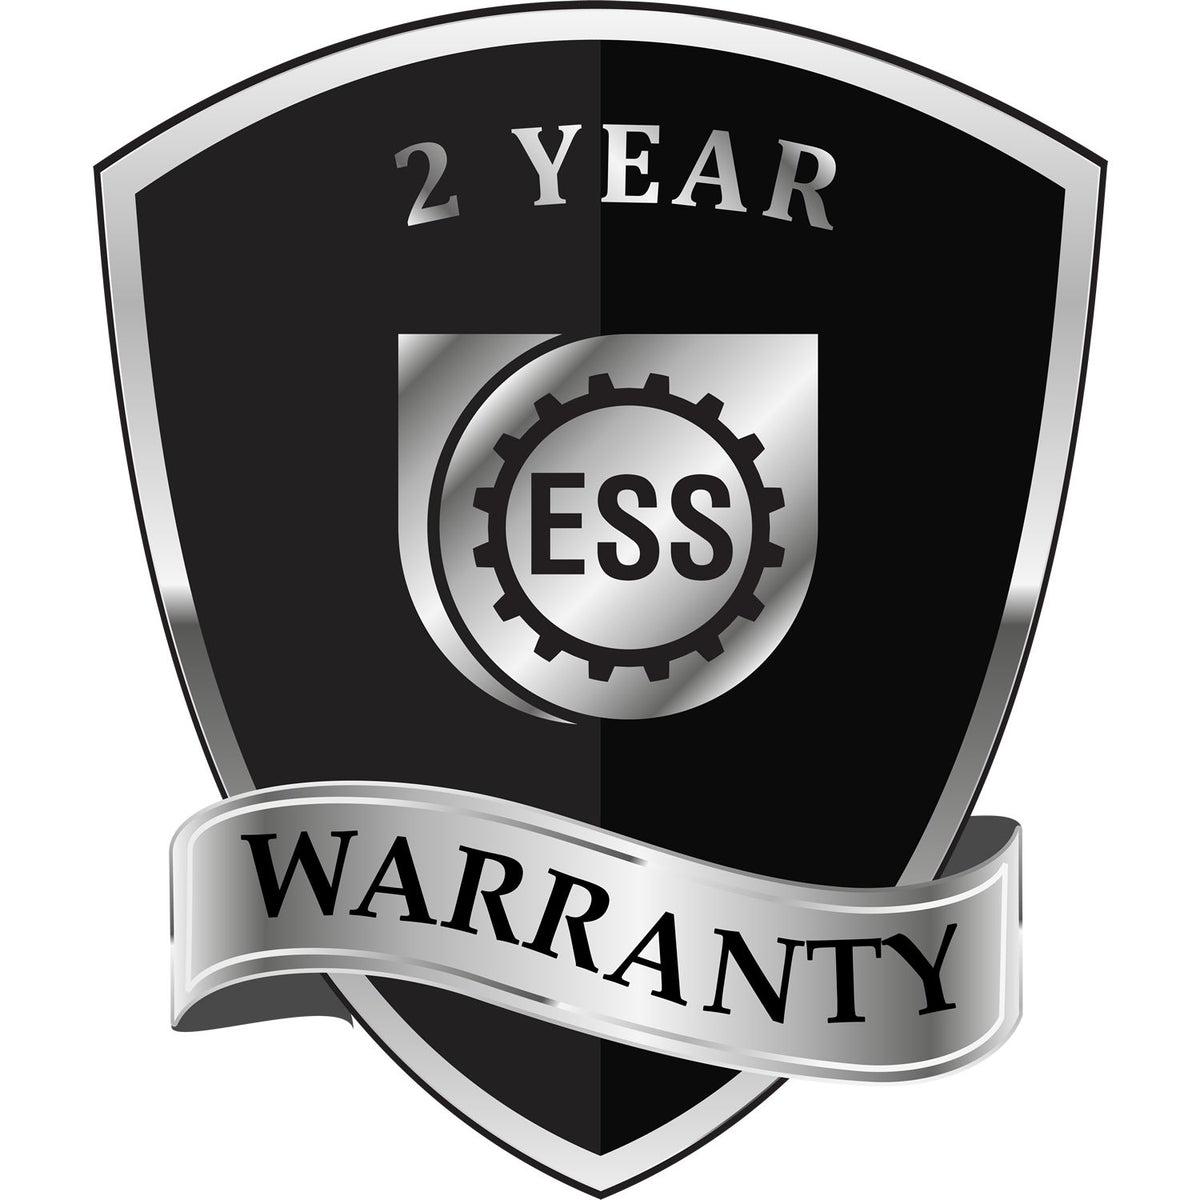 A badge or emblem showing a warranty icon for the Extended Long Reach Connecticut Architect Seal Embosser